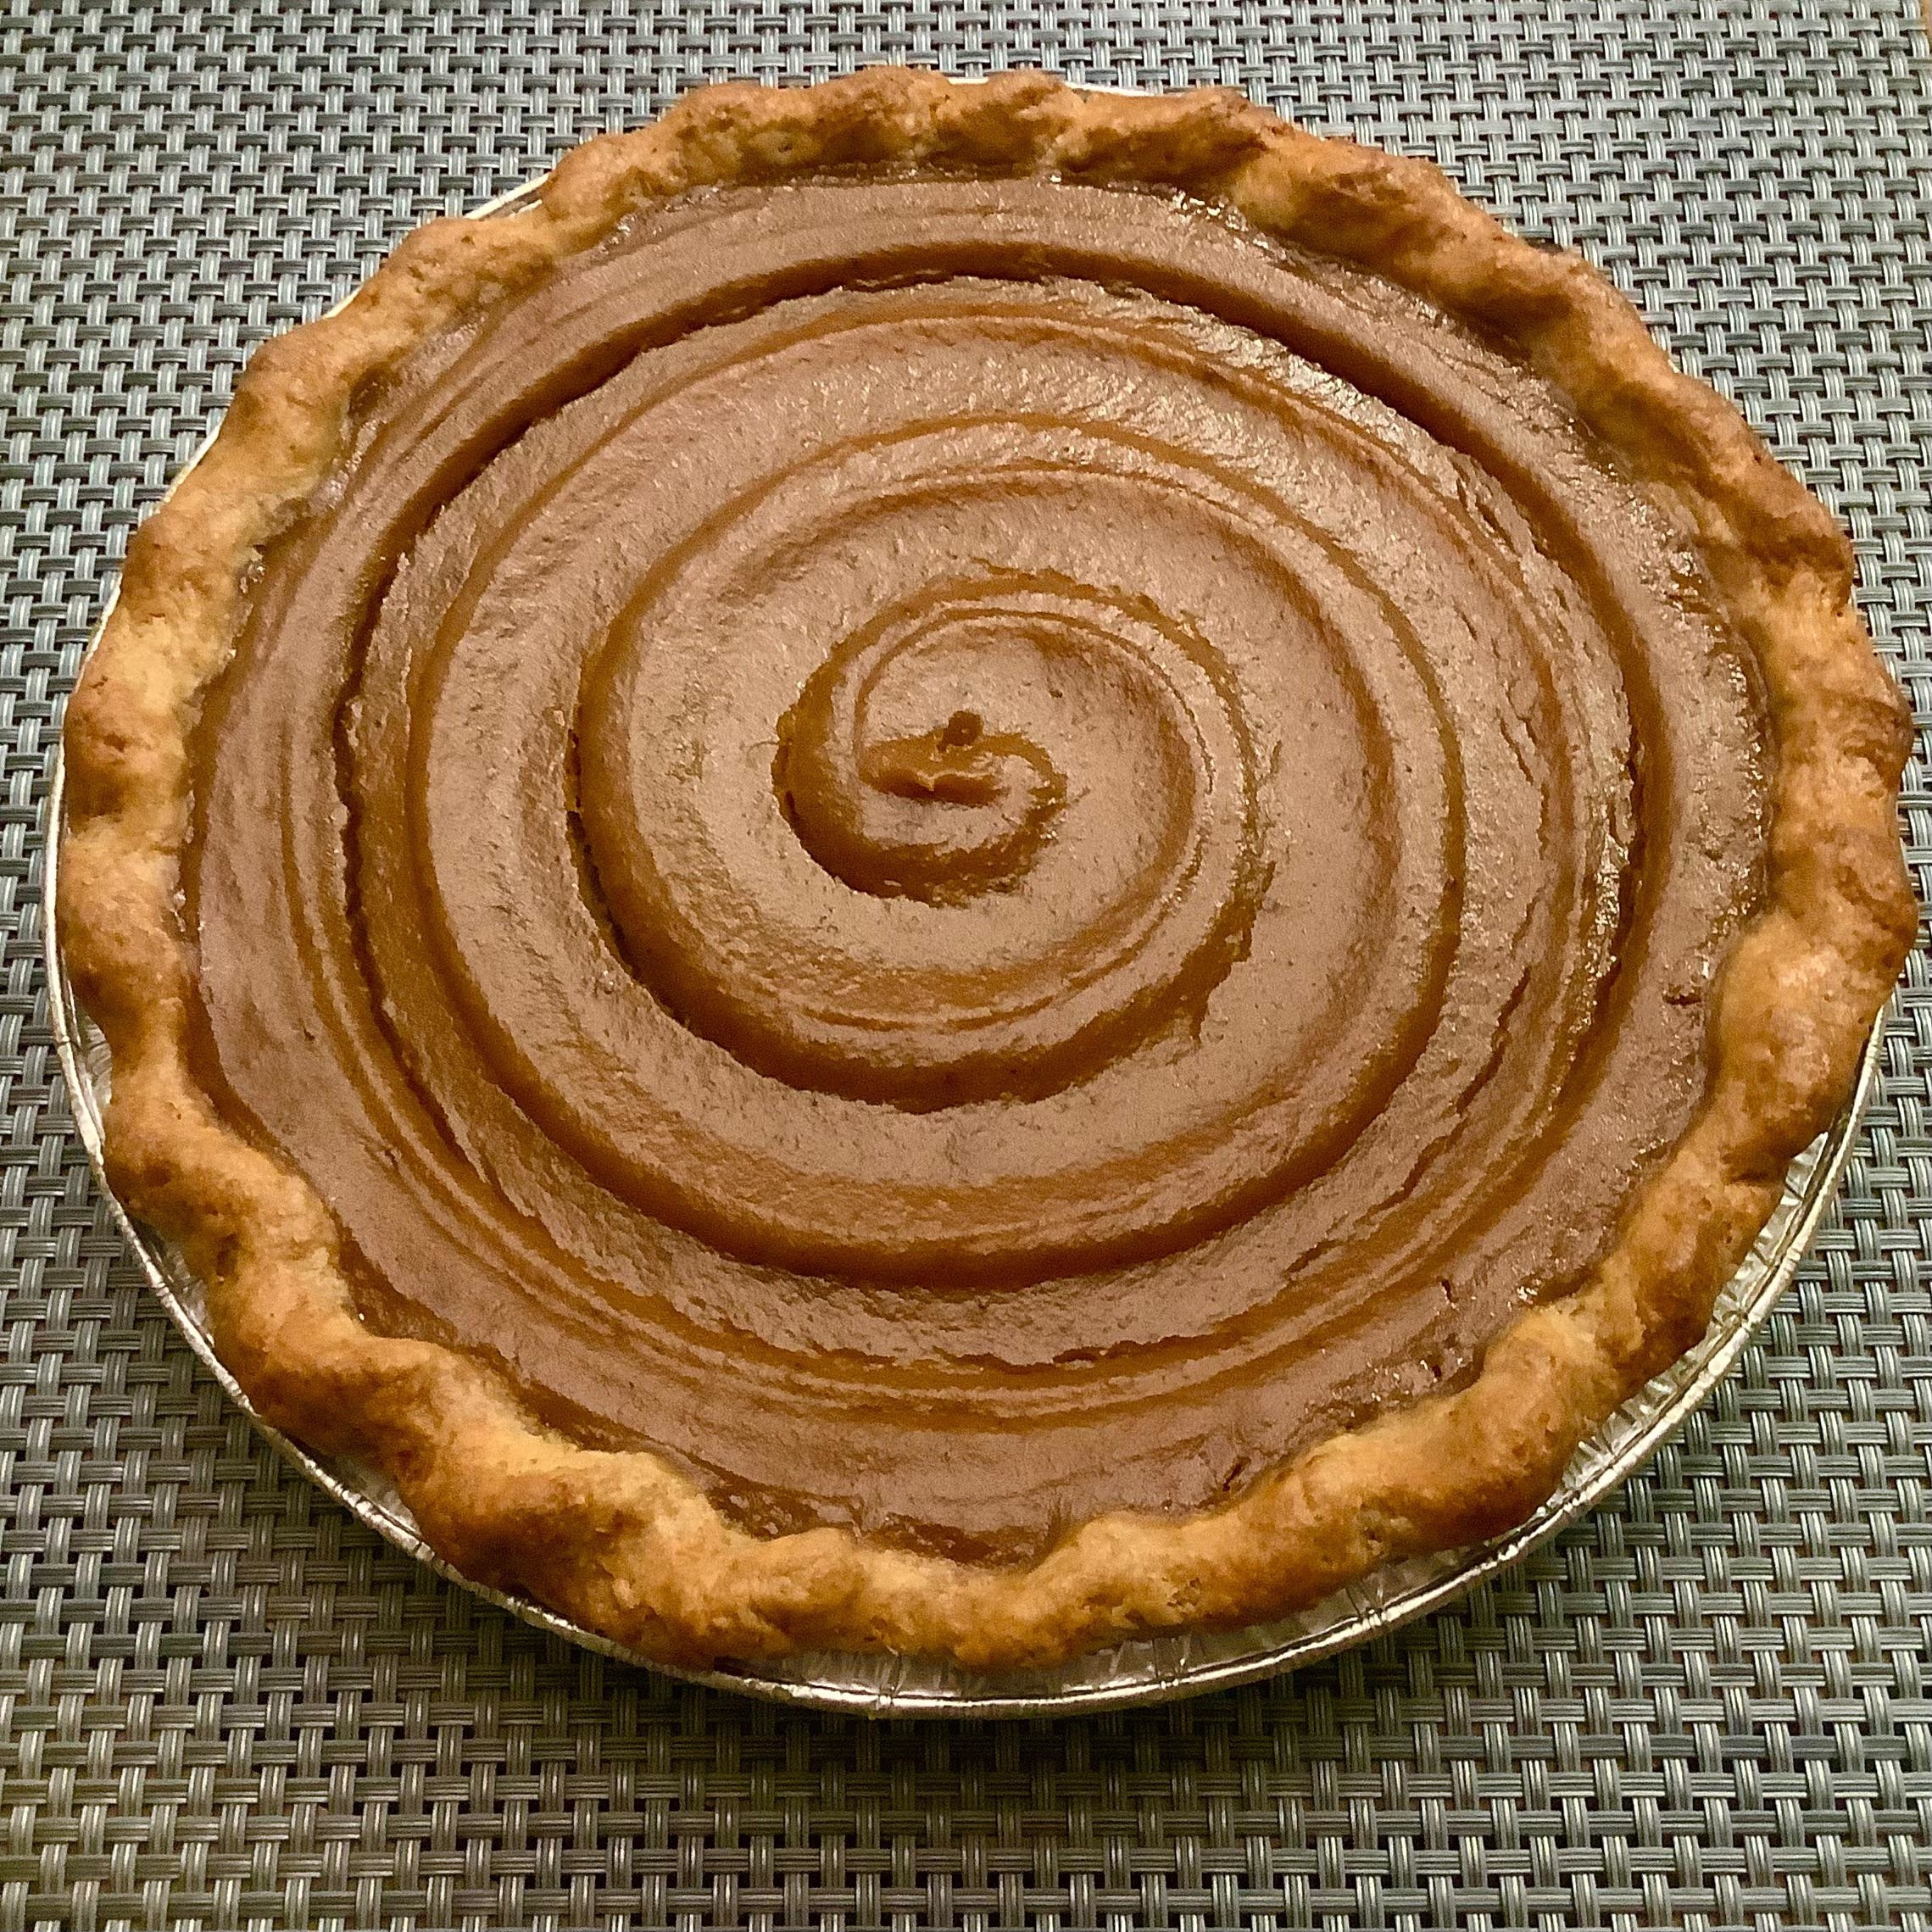 Whole pumpkin pie with a spiral pattern on a textured surface